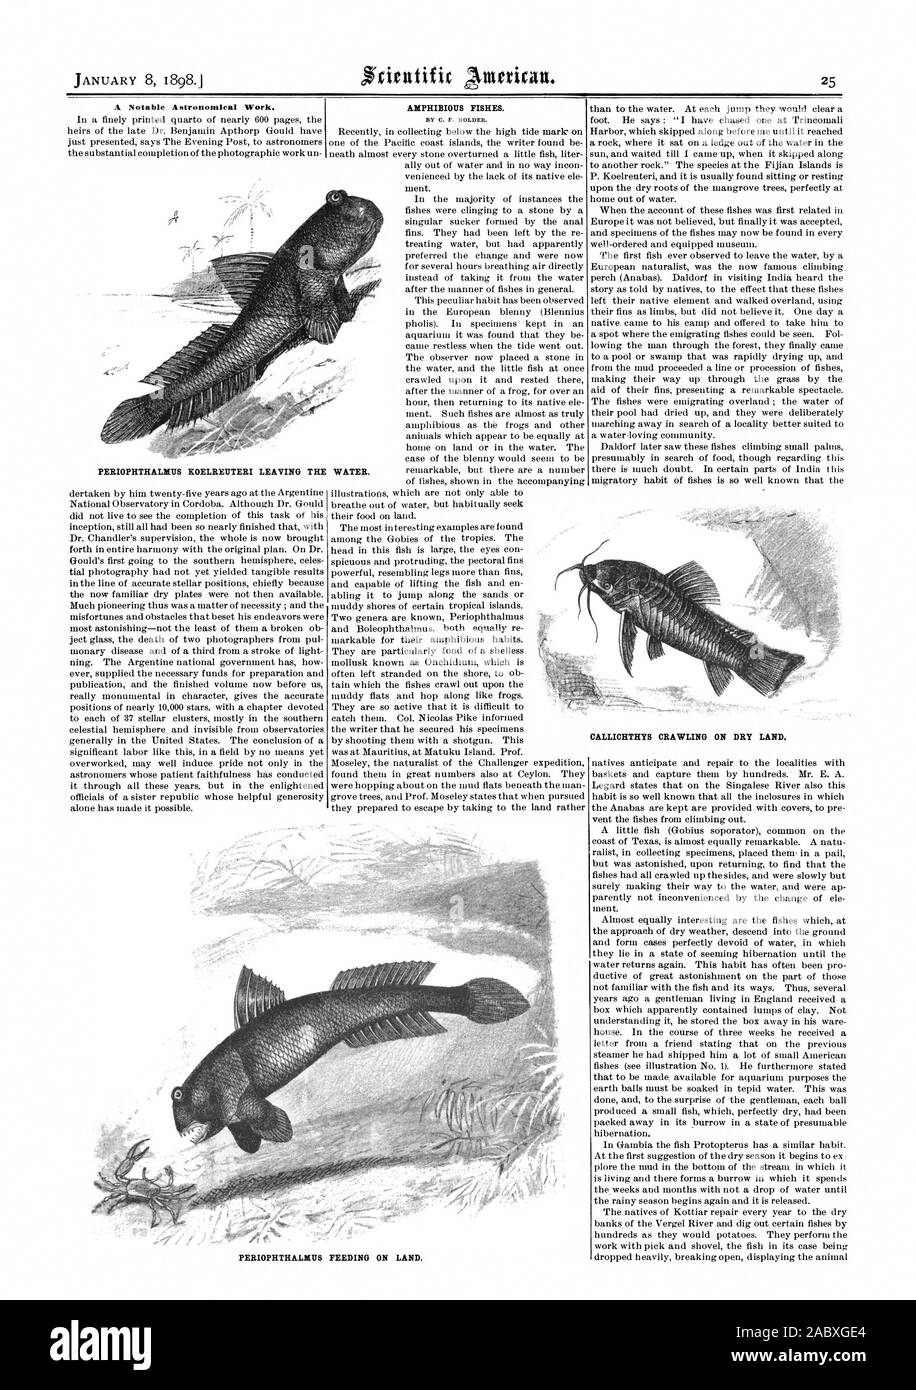 A Notable Astronomical Work. AMPHIBIOUS FISHES. BY C. F. HOLDER. PERIOPHTHALBIUS KOELREUTERI LEAVING THE WATER. PERIOPHTHALKIIS FEEDING ON LAND. CALLICHTHYS CRAWLING ON DRY LAND., scientific american, 1898-01-08 Stock Photo